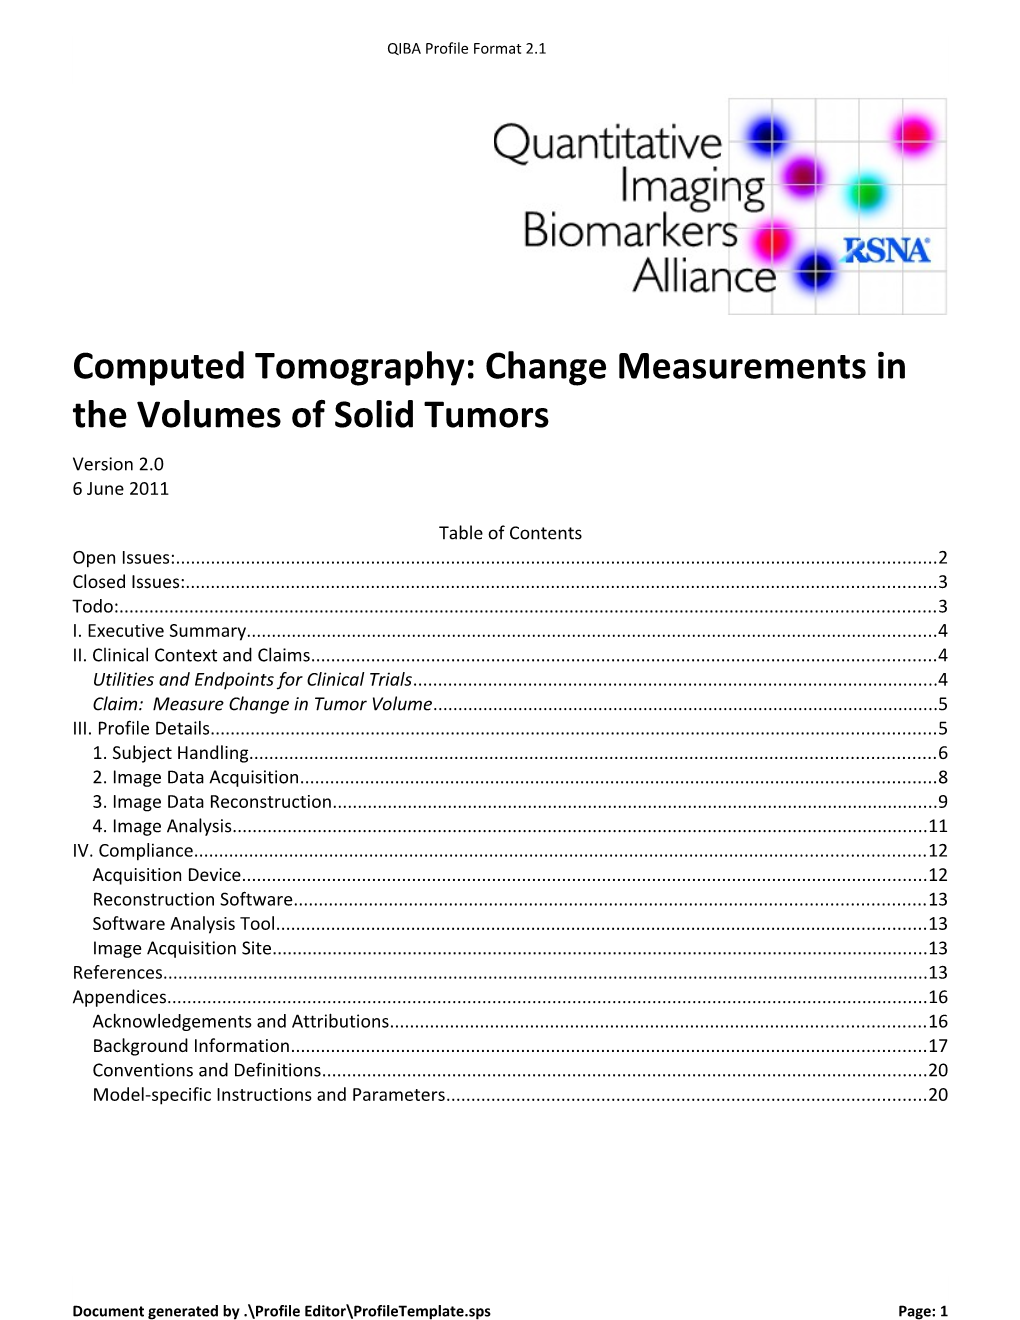 Computed Tomography: Change Measurements in the Volumes of Solid Tumors